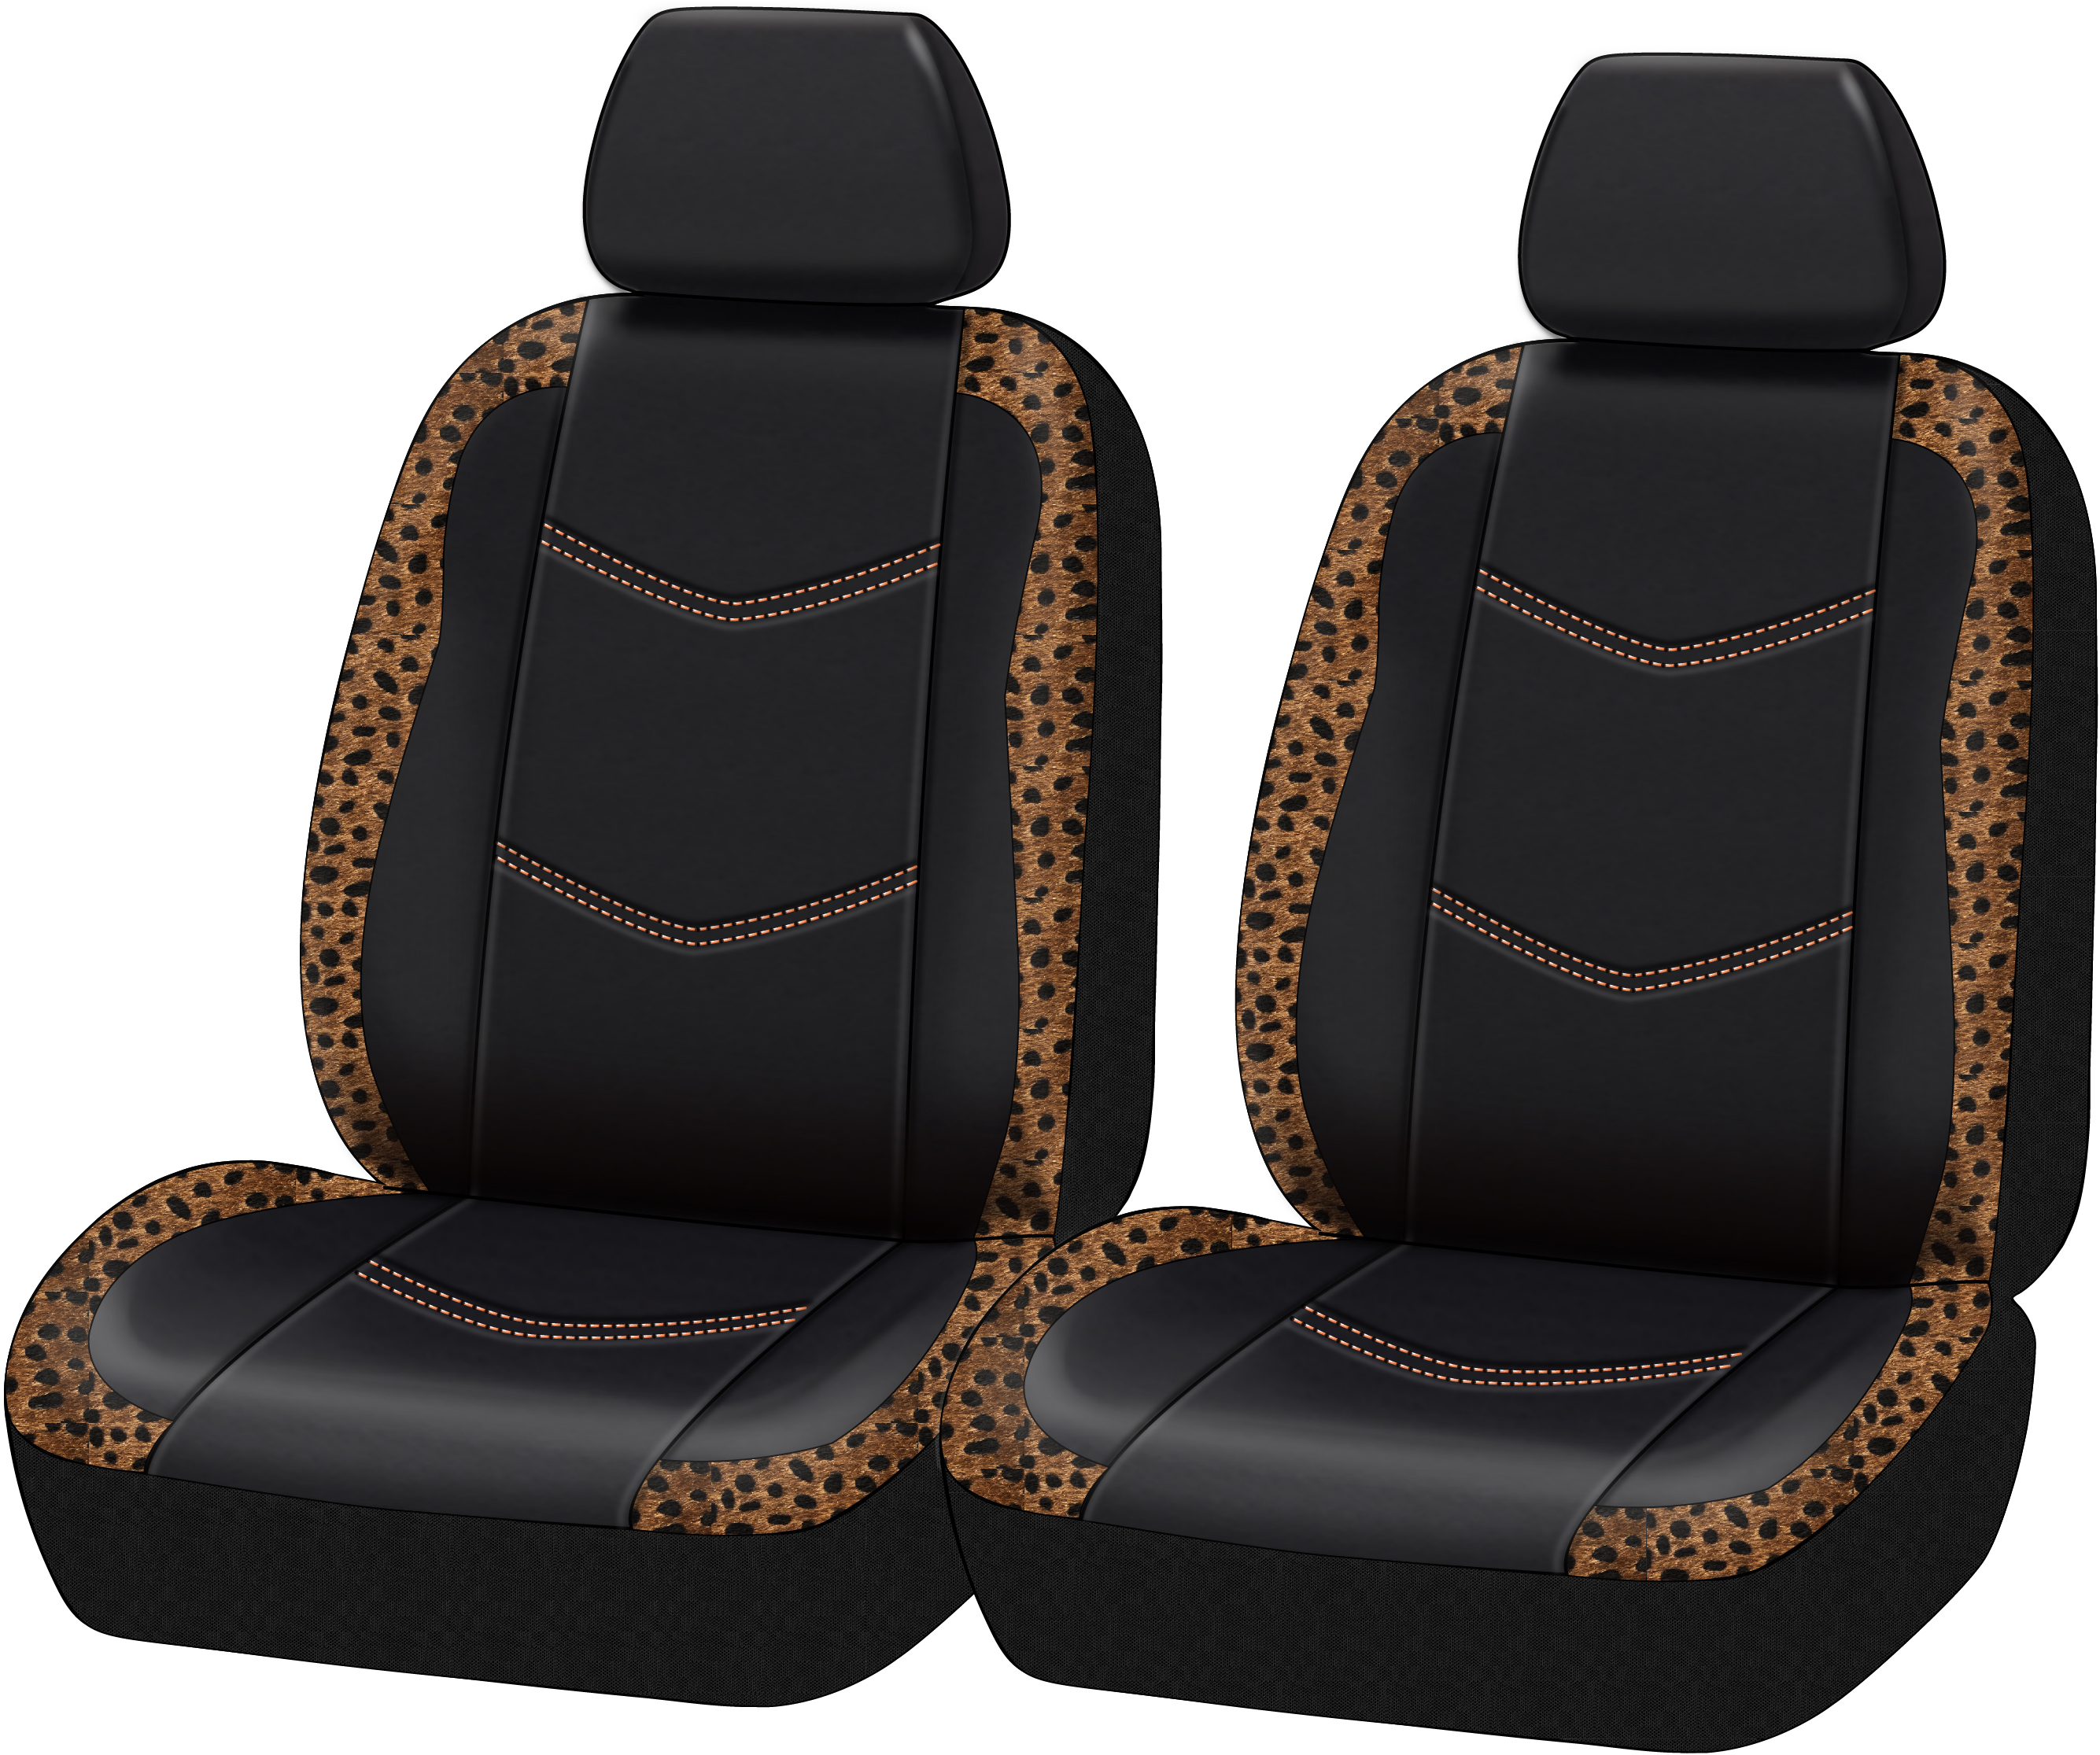 Auto Drive Brown Leopard Faux Leather Car Seat Covers, Set of 2, YT014 - image 2 of 7